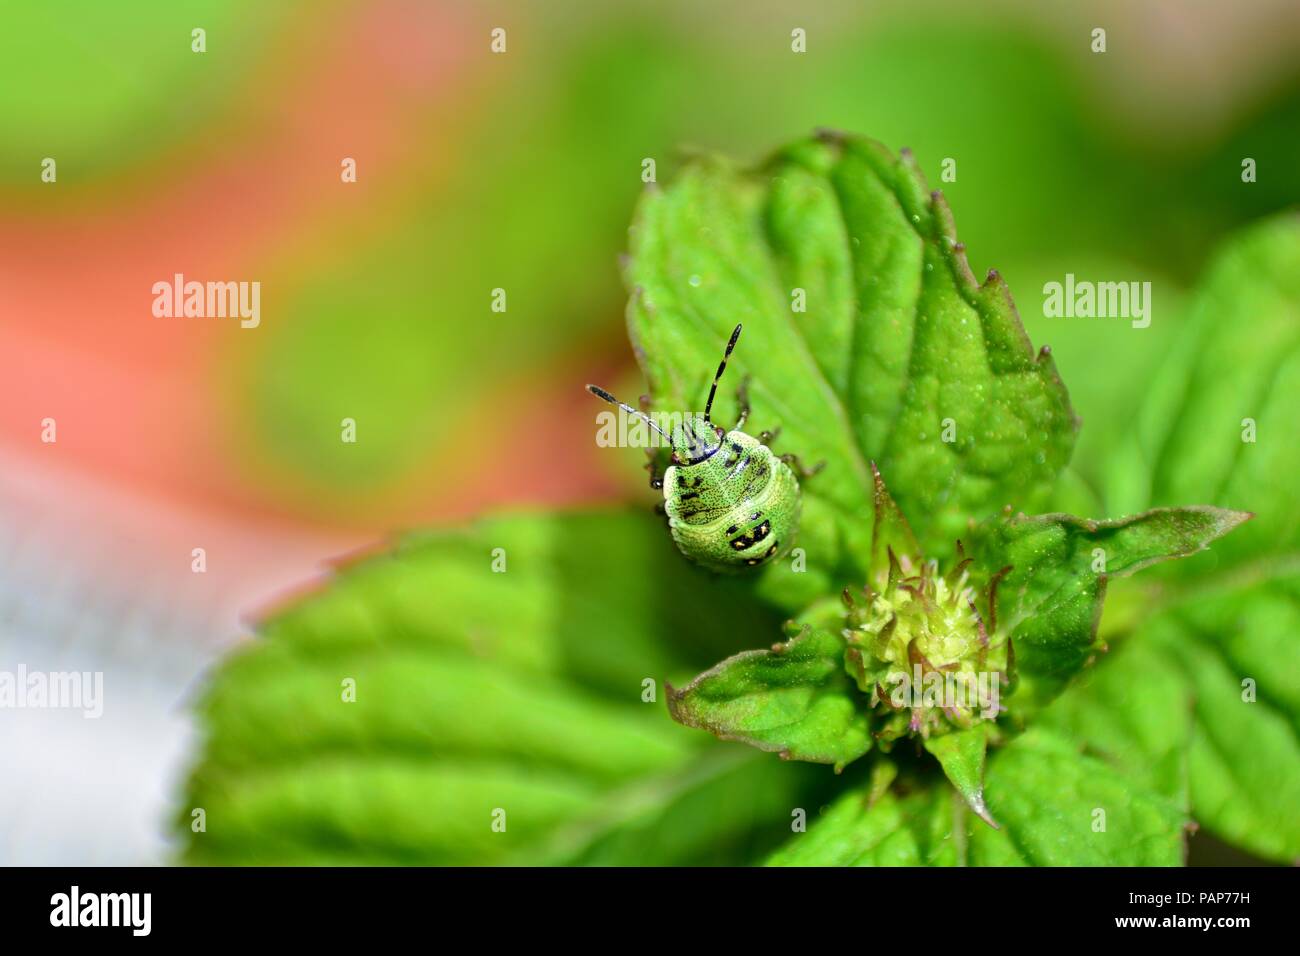 Nymph of a green stink bug  (  Palomena prasina  )  on green leaf in nature Stock Photo